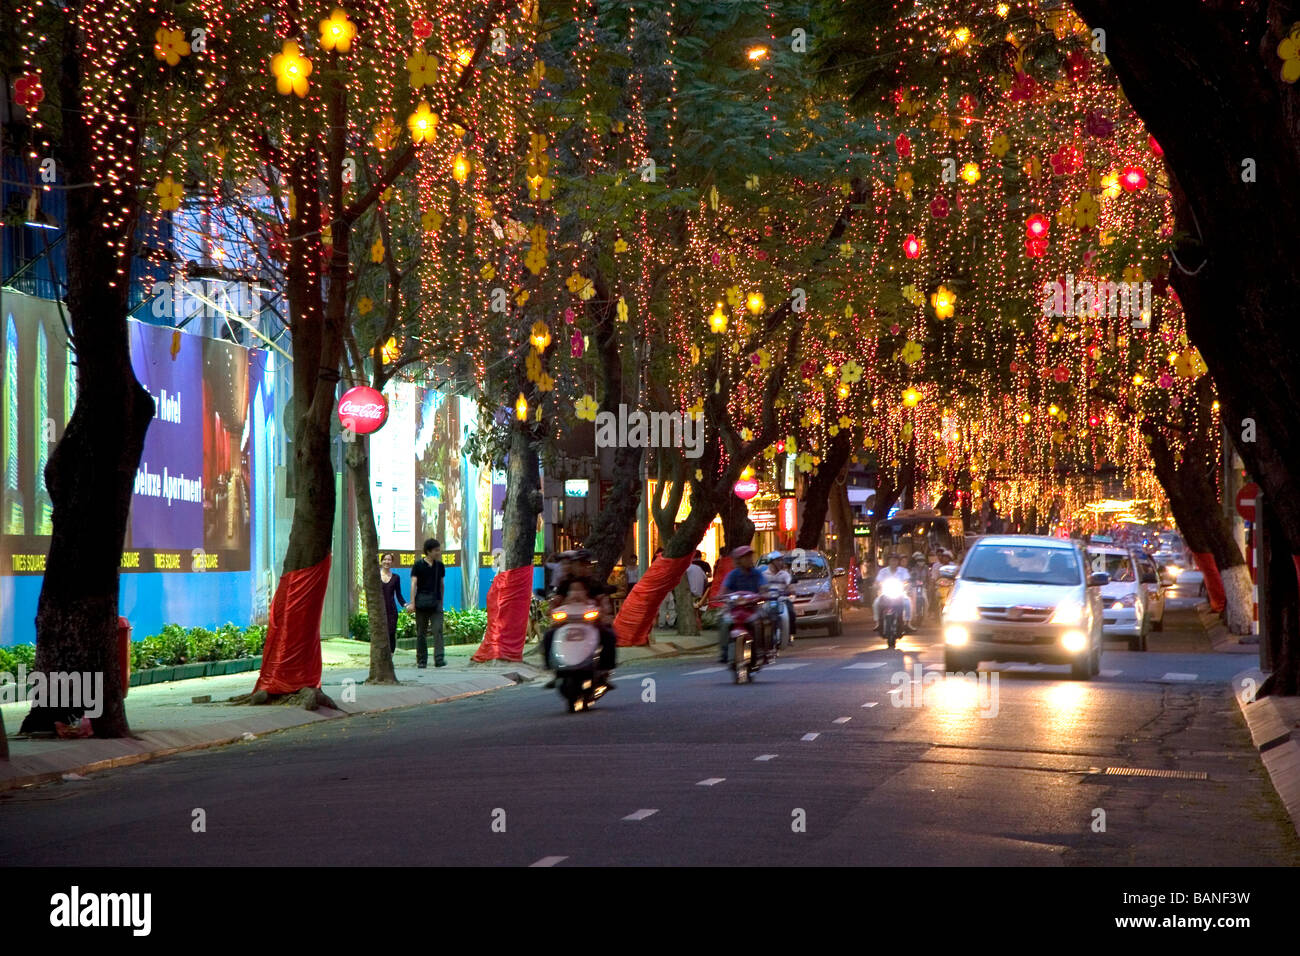 Decorative lights hang from trees on Dong Khoi street in celebration of Tet Lunar New Year in Ho Chi Minh City Vietnam Stock Photo